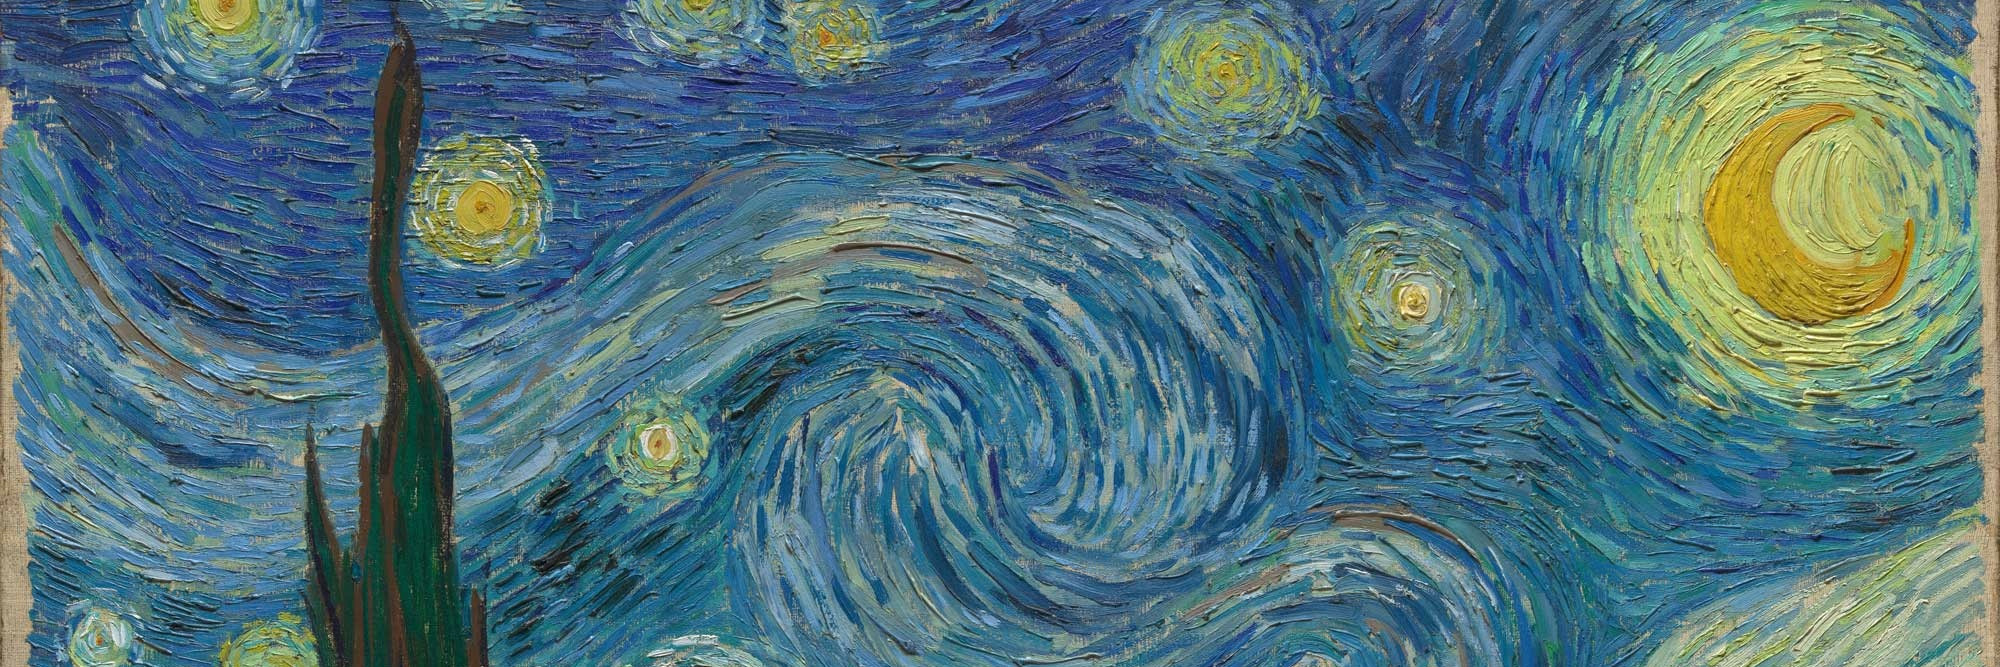 Vincent van Gogh. The Starry Night. 1889. Oil on canvas, 29 × 36 1/4&#34; (73.7 × 92.1 cm). Acquired through the Lillie P. Bliss Bequest (by exchange). Conservation was made possible by the Bank of America Art Conservation Project